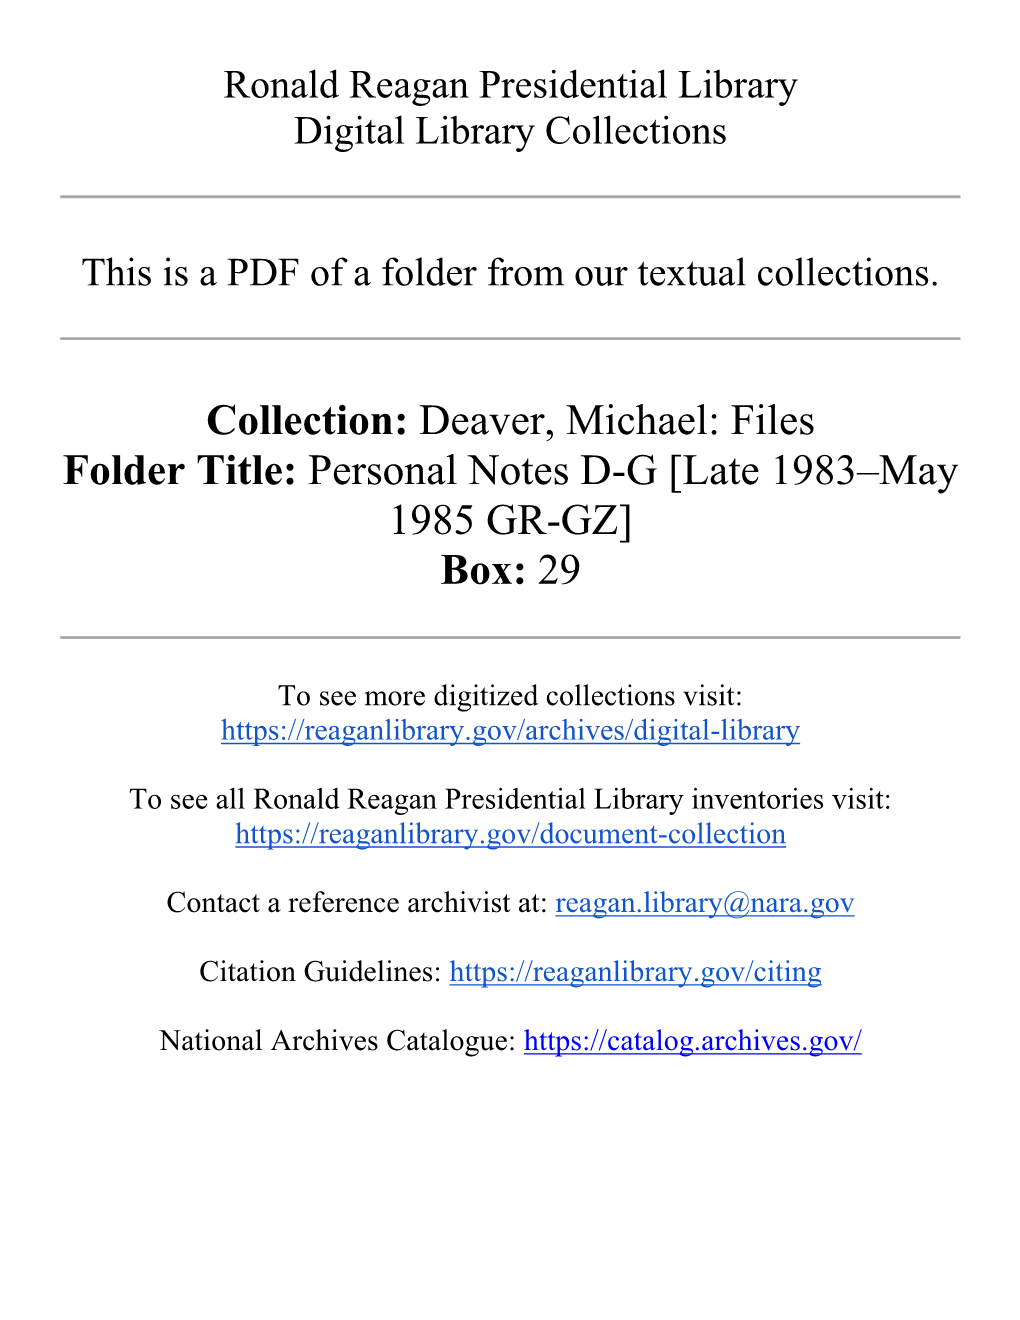 Deaver, Michael: Files Folder Title: Personal Notes D-G [Late 1983–May 1985 GR-GZ] Box: 29